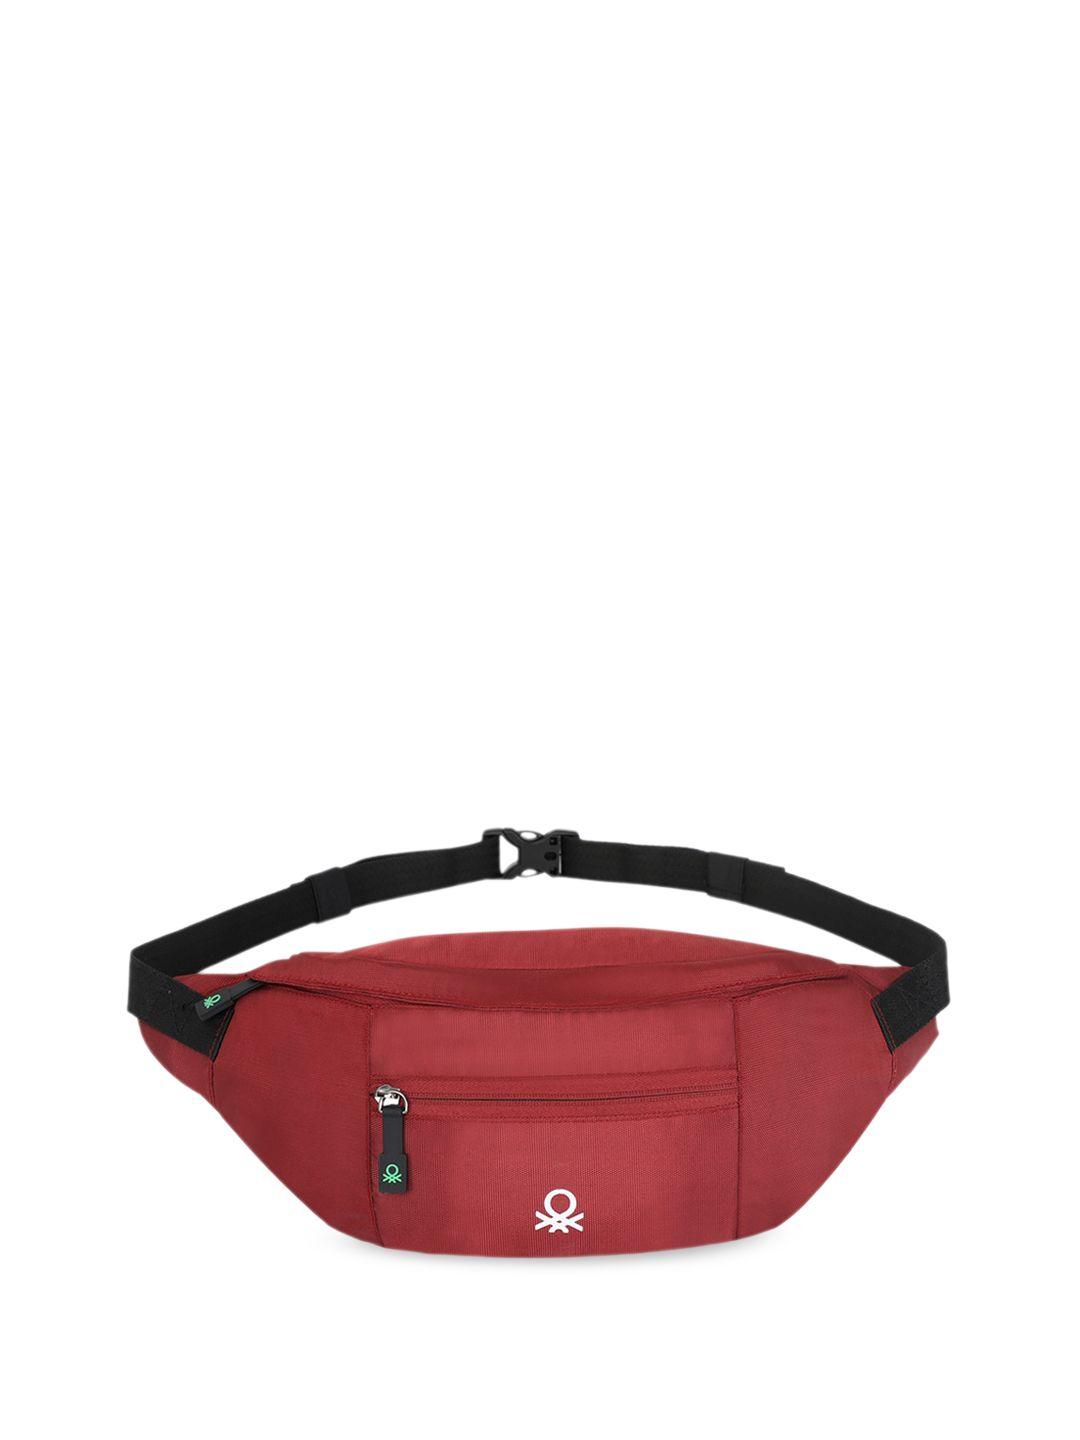 united colors of benetton women textured waist pouch